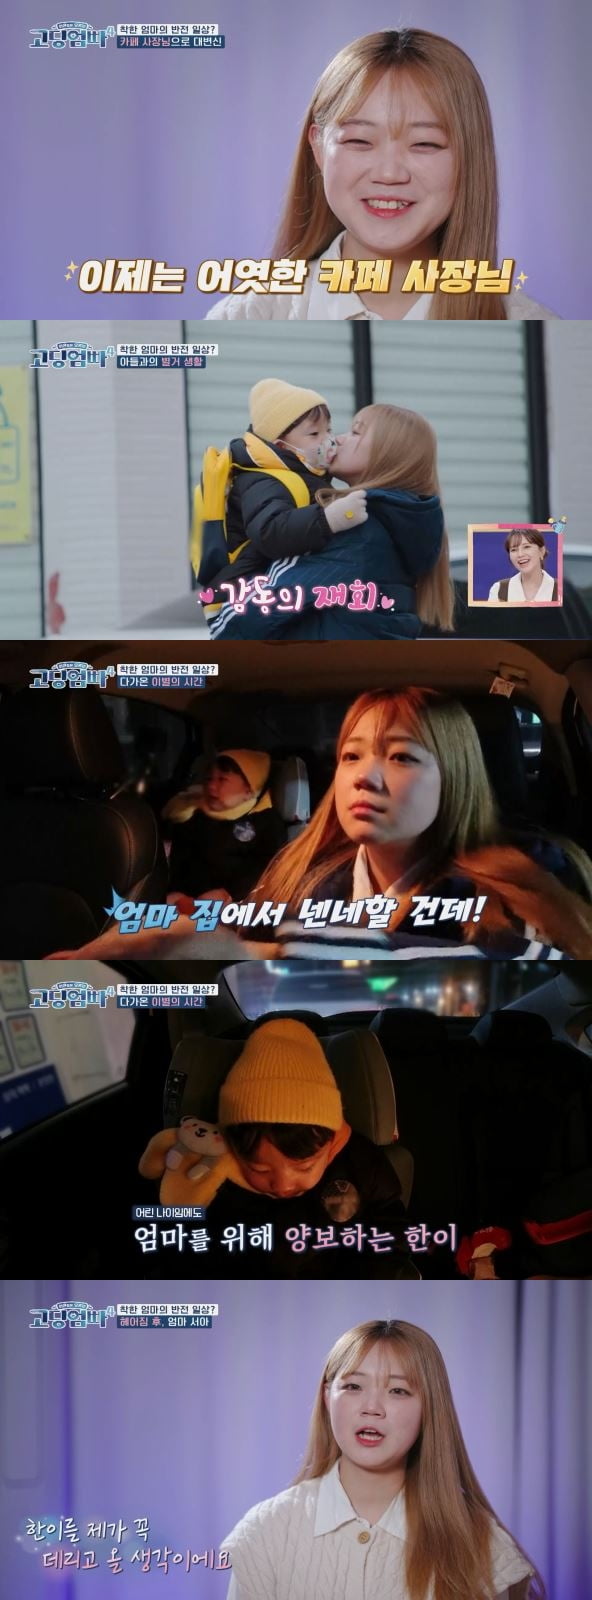 Kang Hyo-min, who gave birth in the bathroom, became a mother of five children